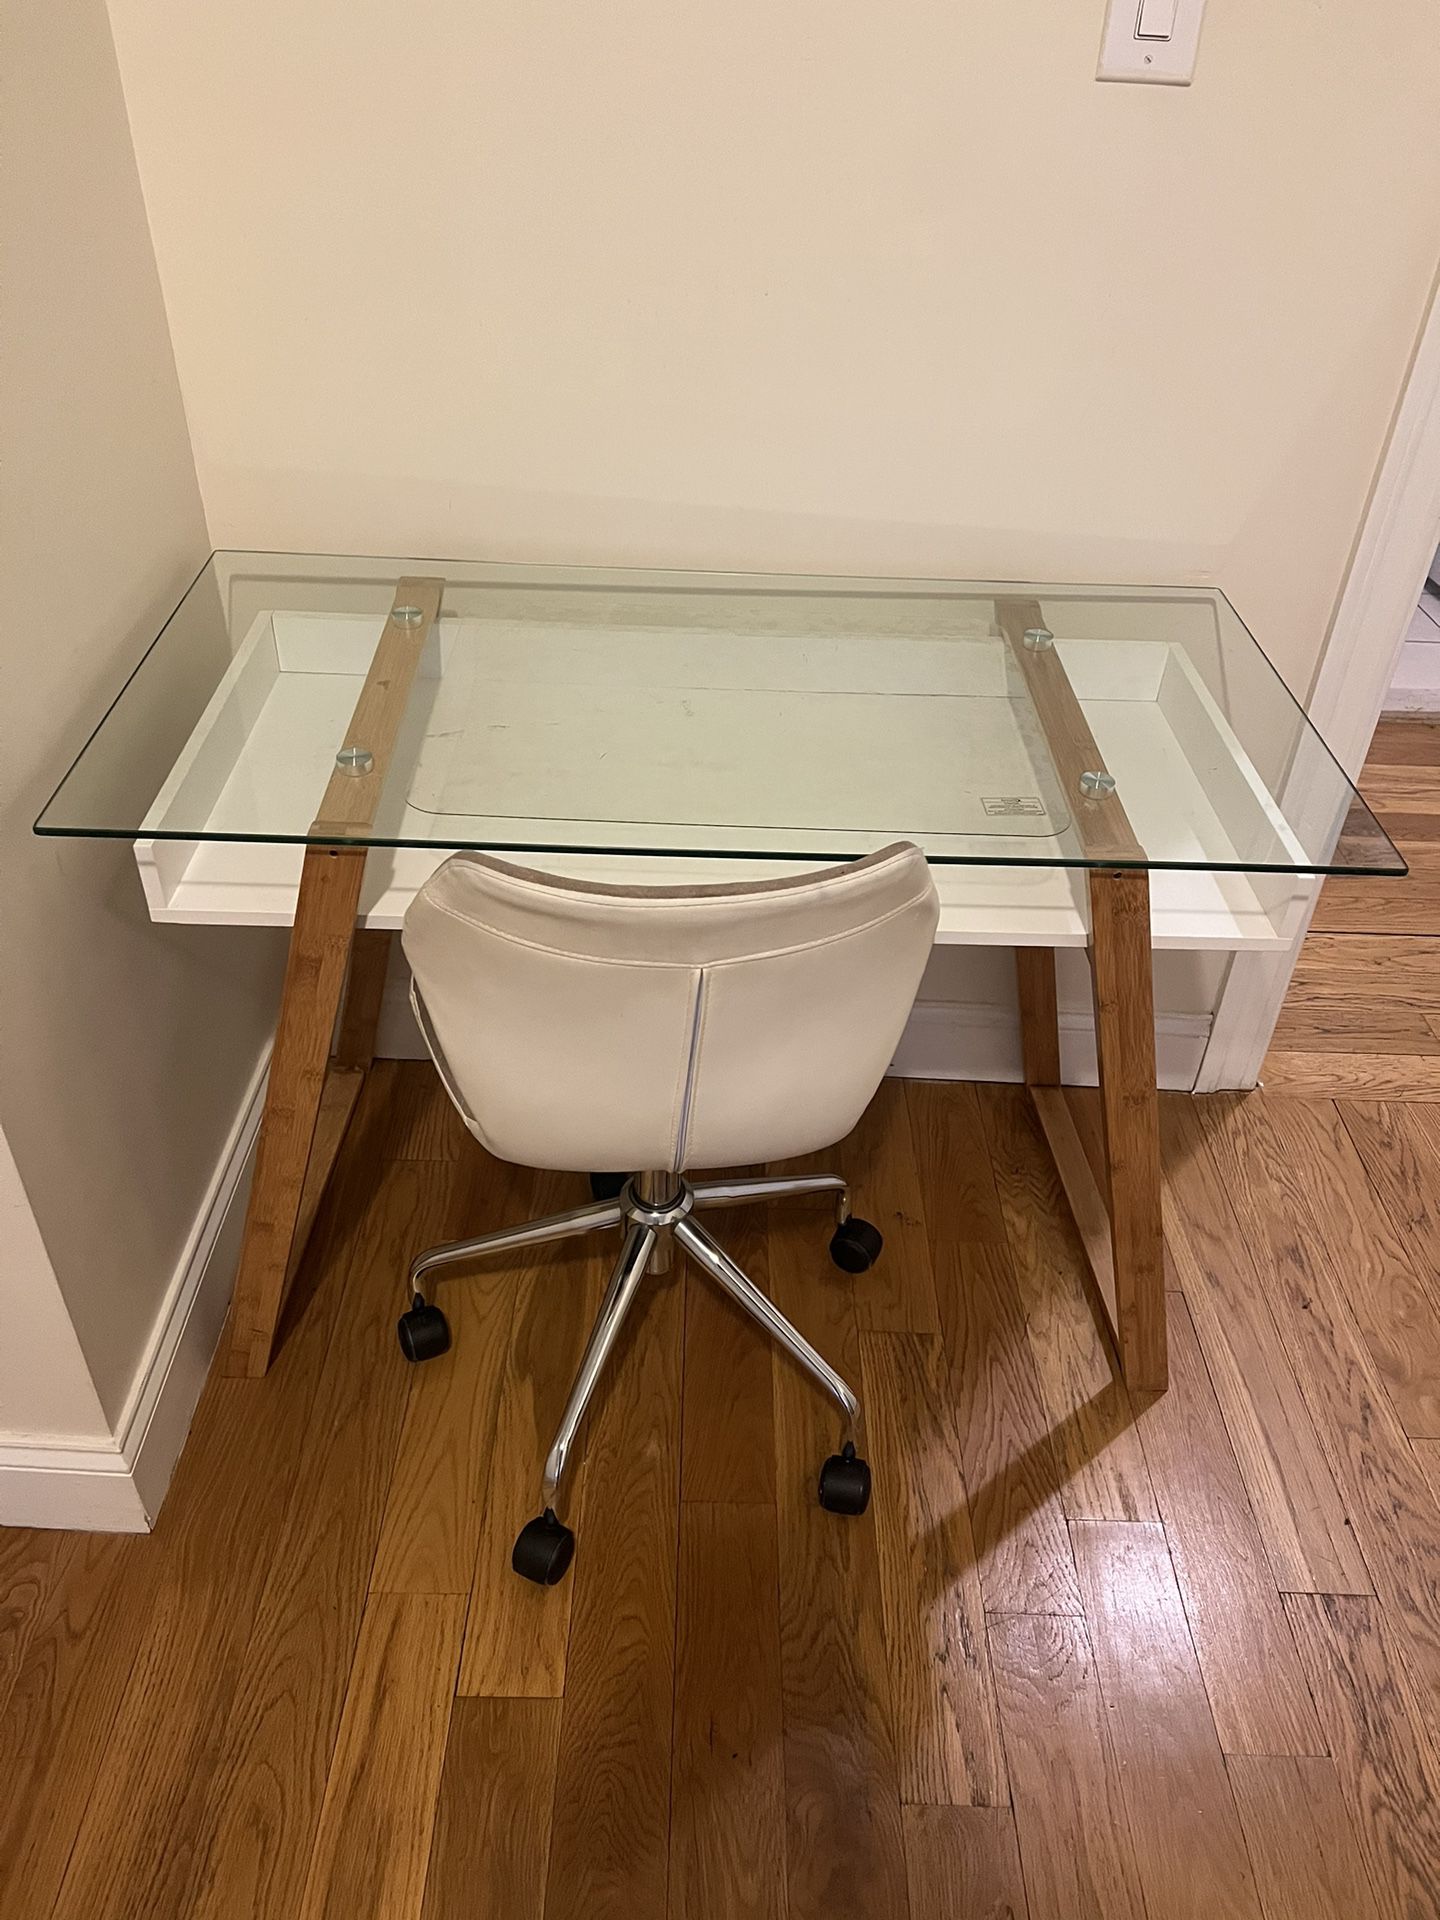 Glass and Wood Desk and Chair $40